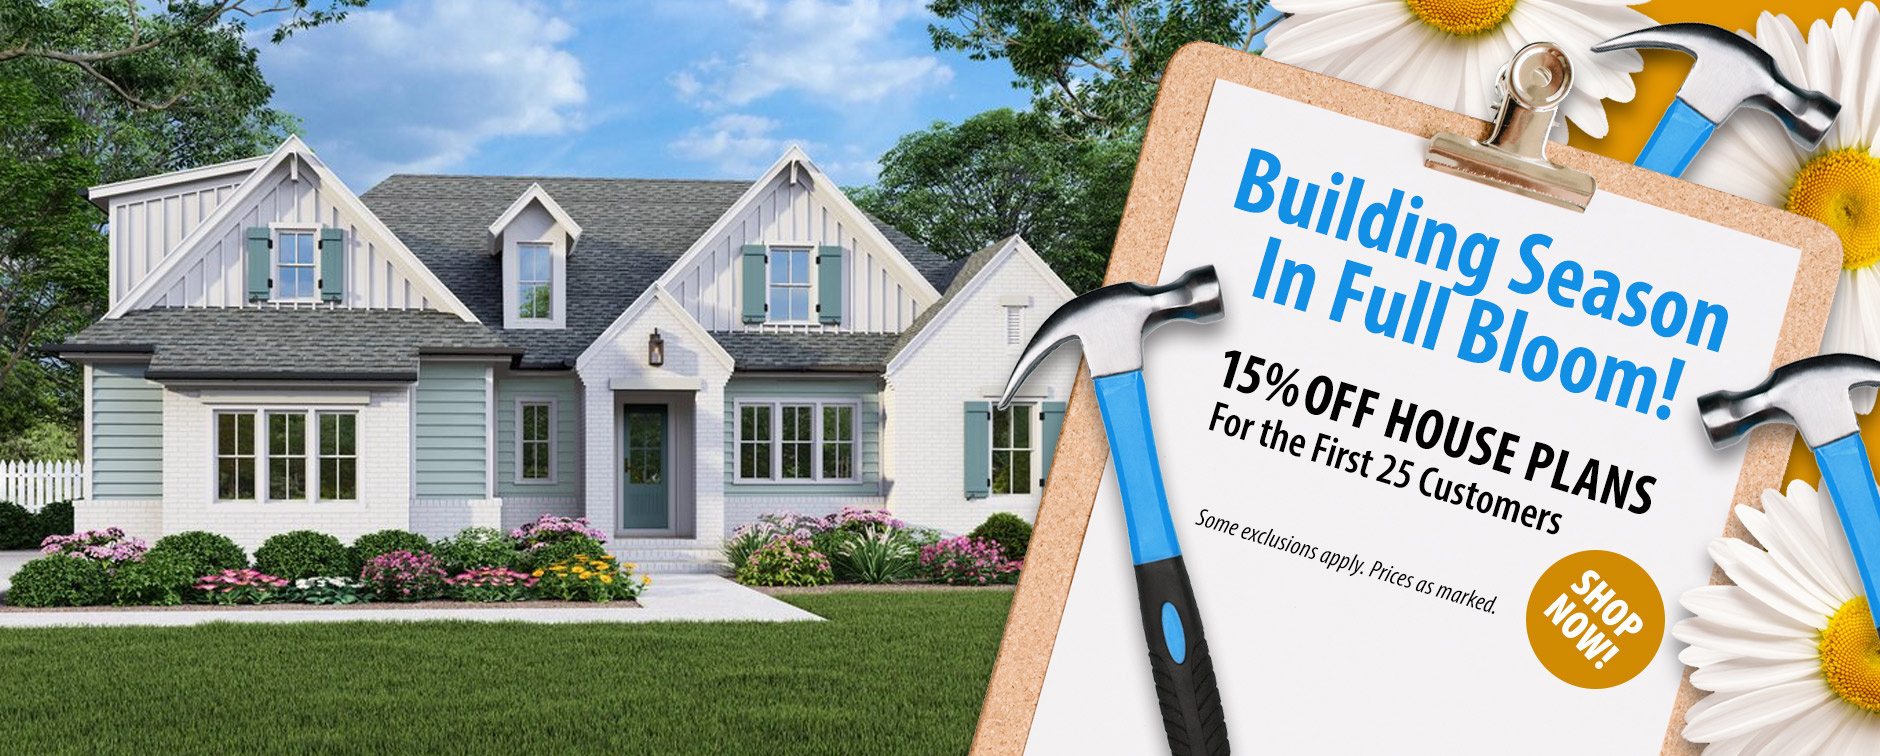 Enjoy 15% Off Thousands of House Plans. First 25 Customers.